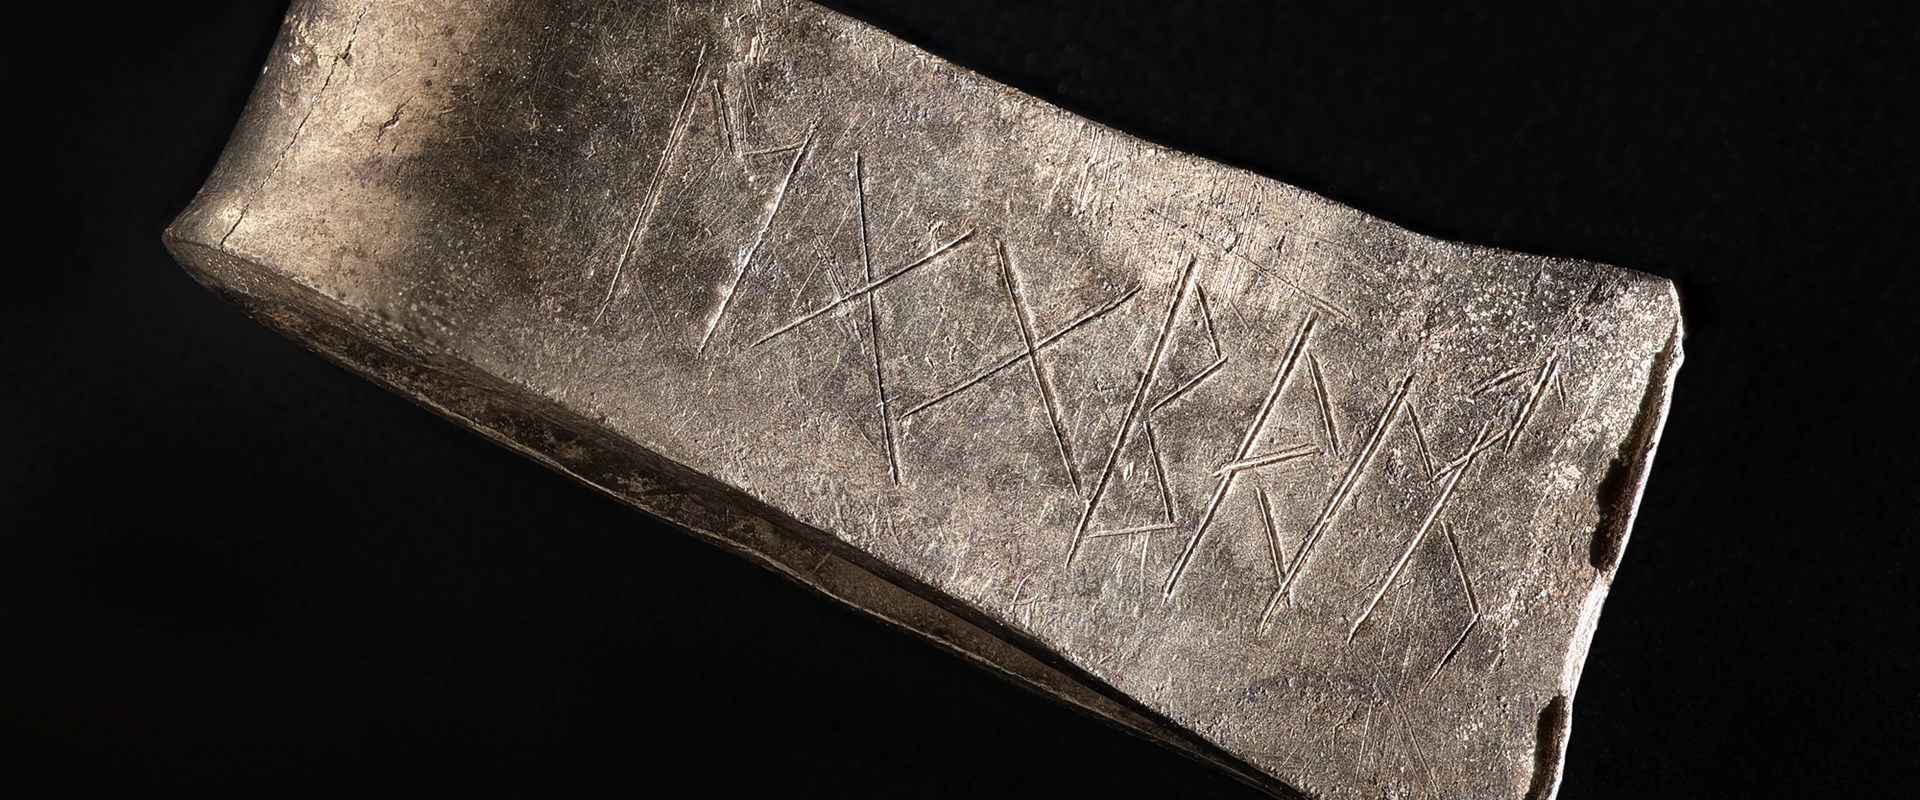 Runic ring with markings.